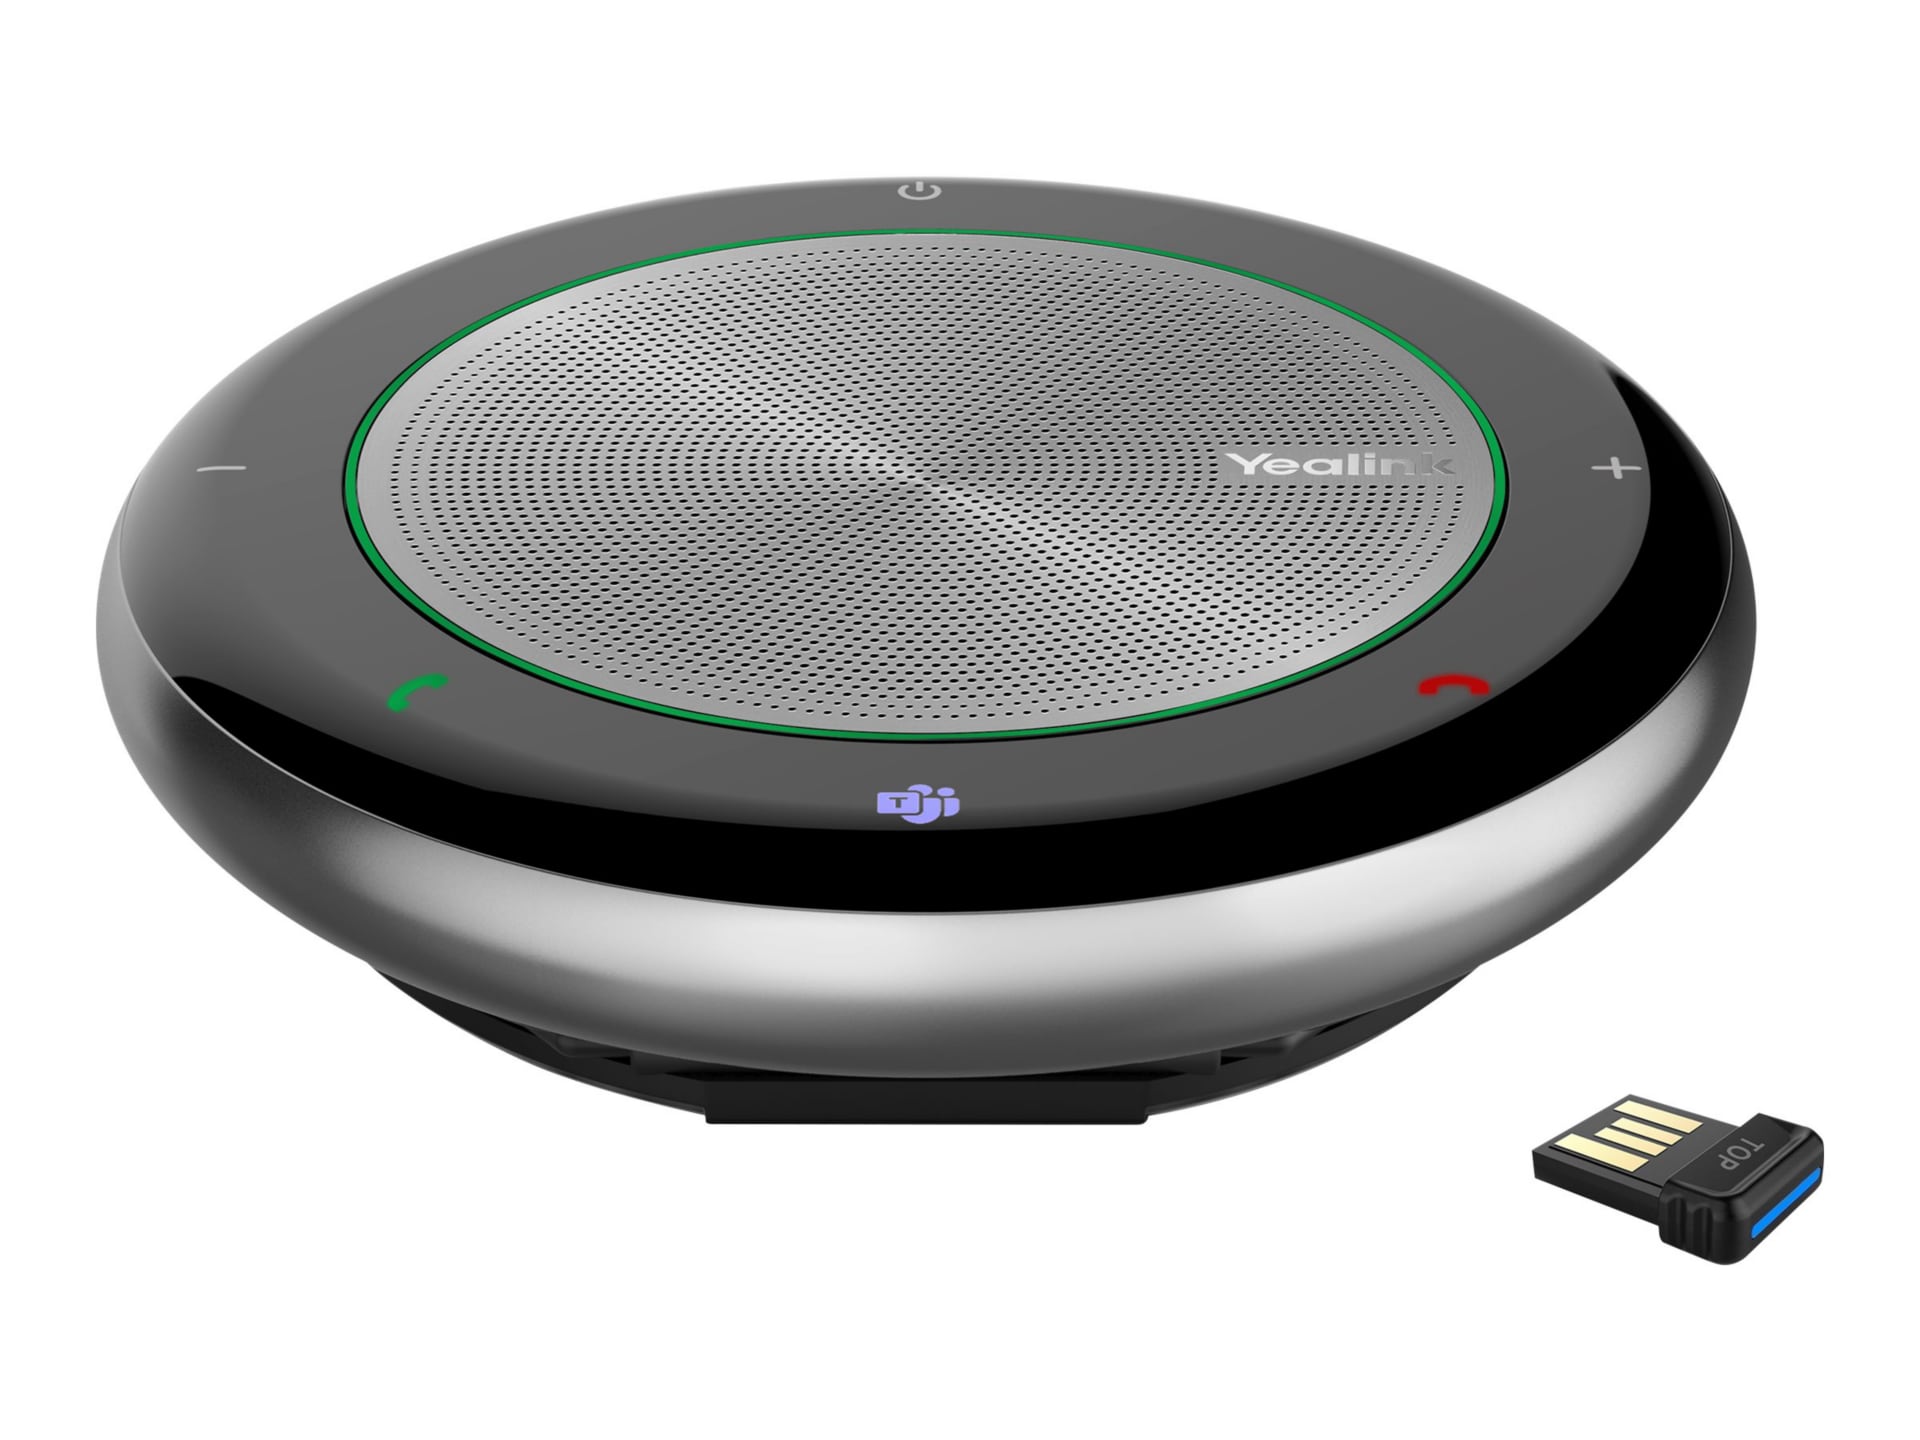 Yealink CP700 Portable Speakerphone with USB Connectivity